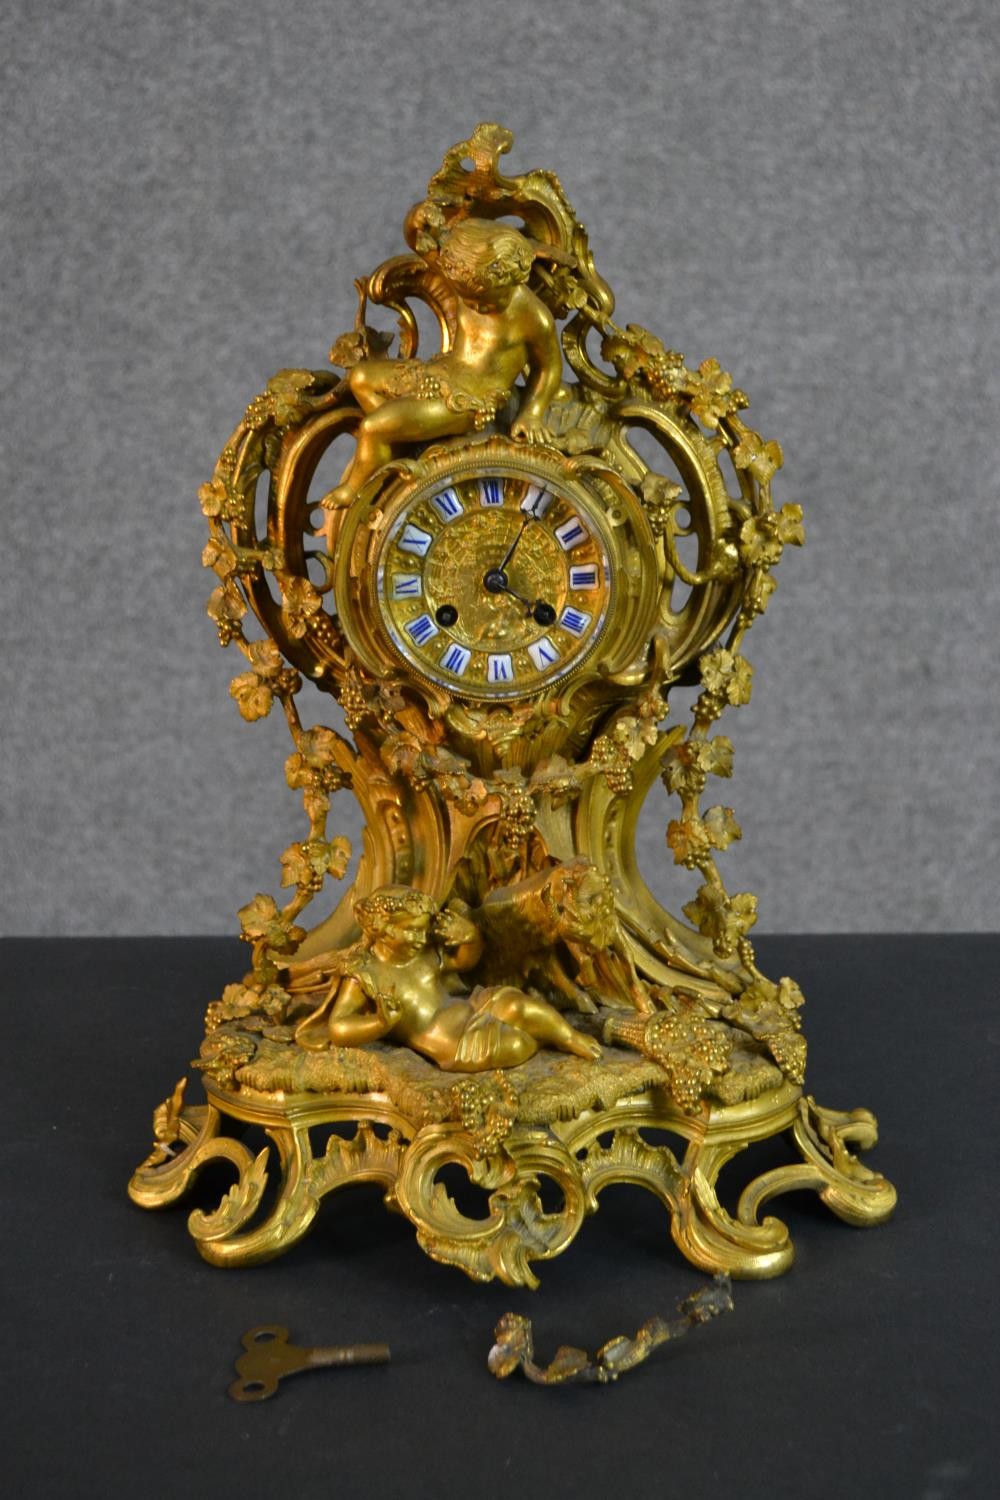 A 19th century French gilt spelter and ormolu mantel clock by Henry Marc of Paris, in Rococo